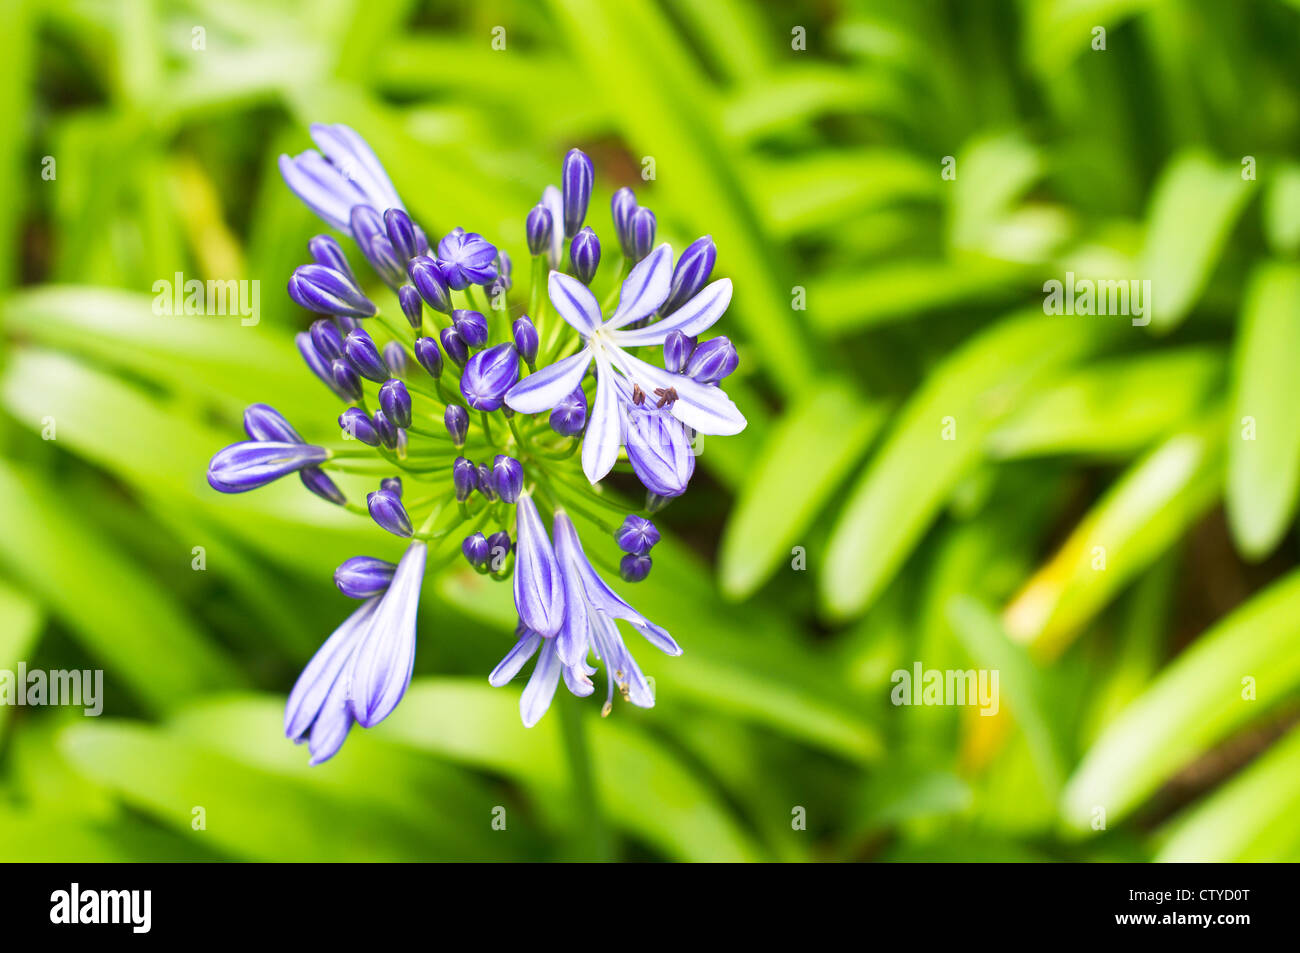 Agapanthus flowers or African Lily, scientific name is Agapanthus africanus. Stock Photo